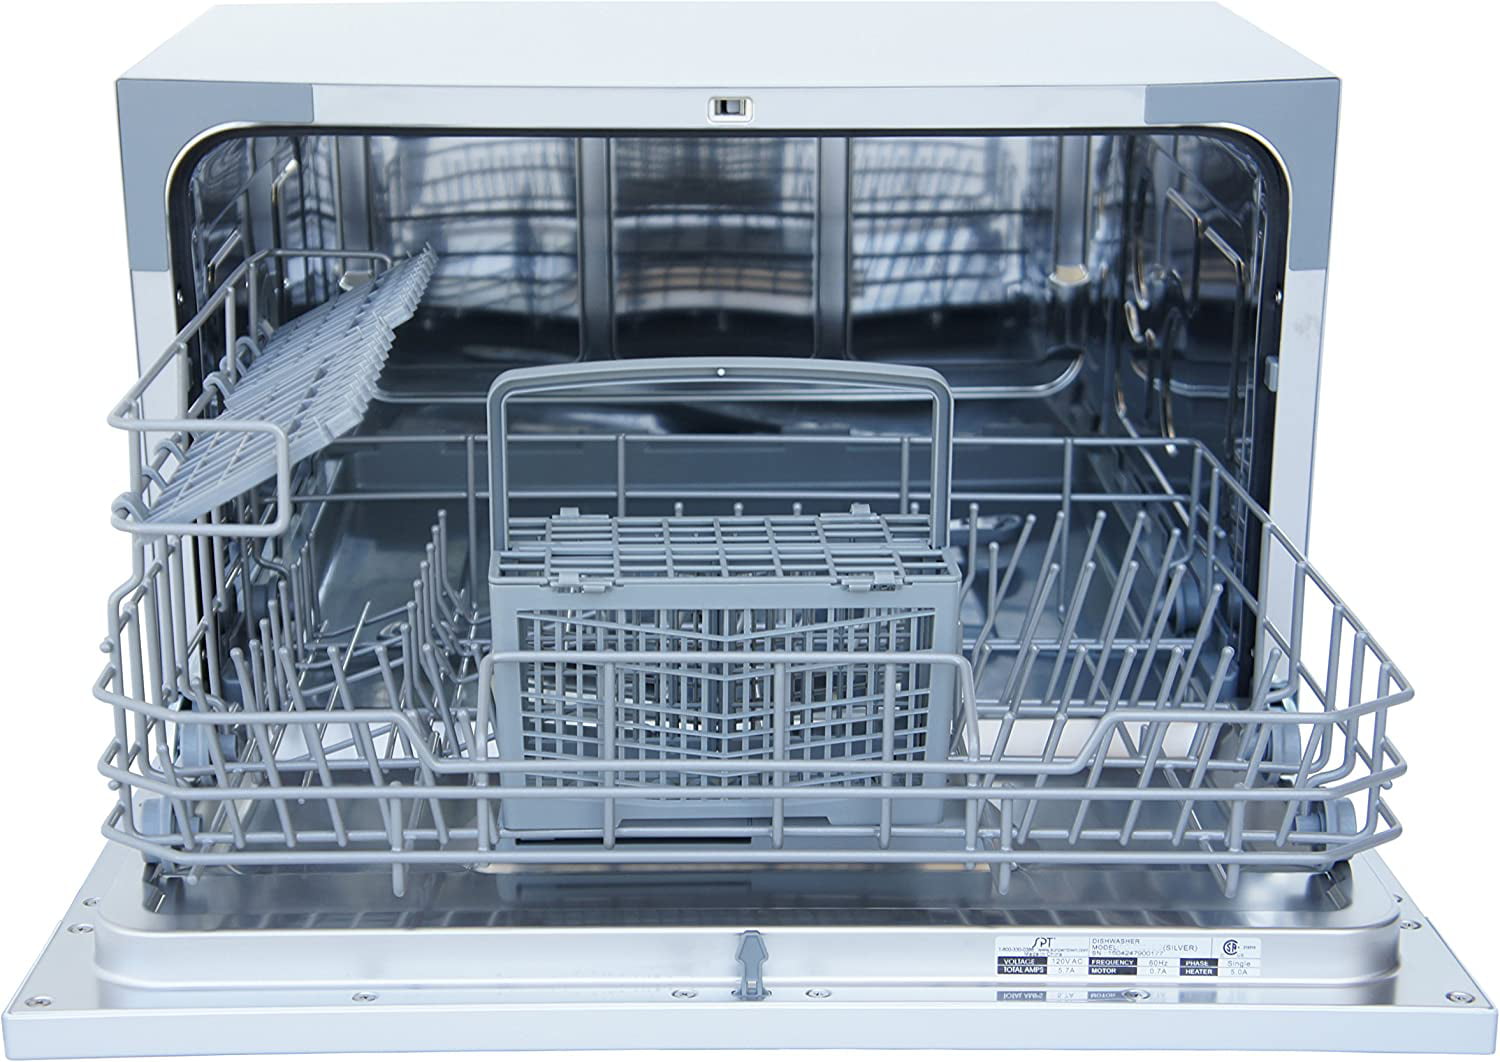 ENERGY STAR Compact Countertop Dishwasher with Delay Start - Portable Dishwasher with Stainless Steel Interior and 6 Place Settings Rack Silverware Basket for Apartment Office And Home Kitchen, White - 1